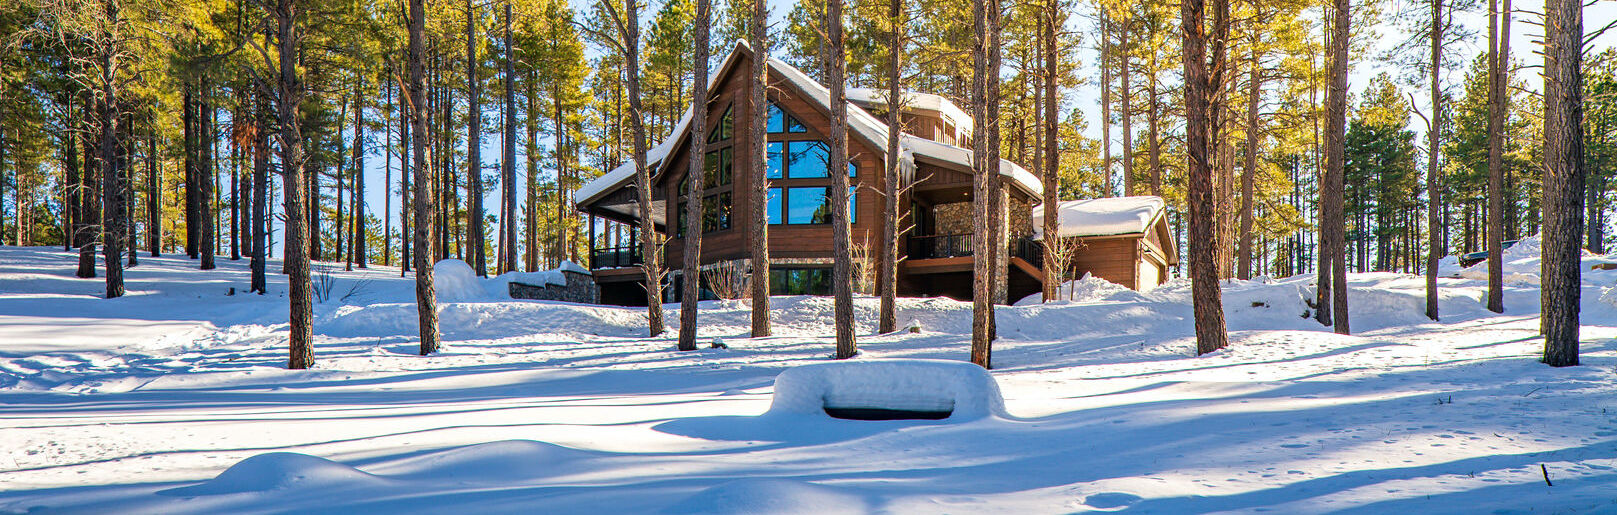 Cabins for Rent in Flagstaff Arizona